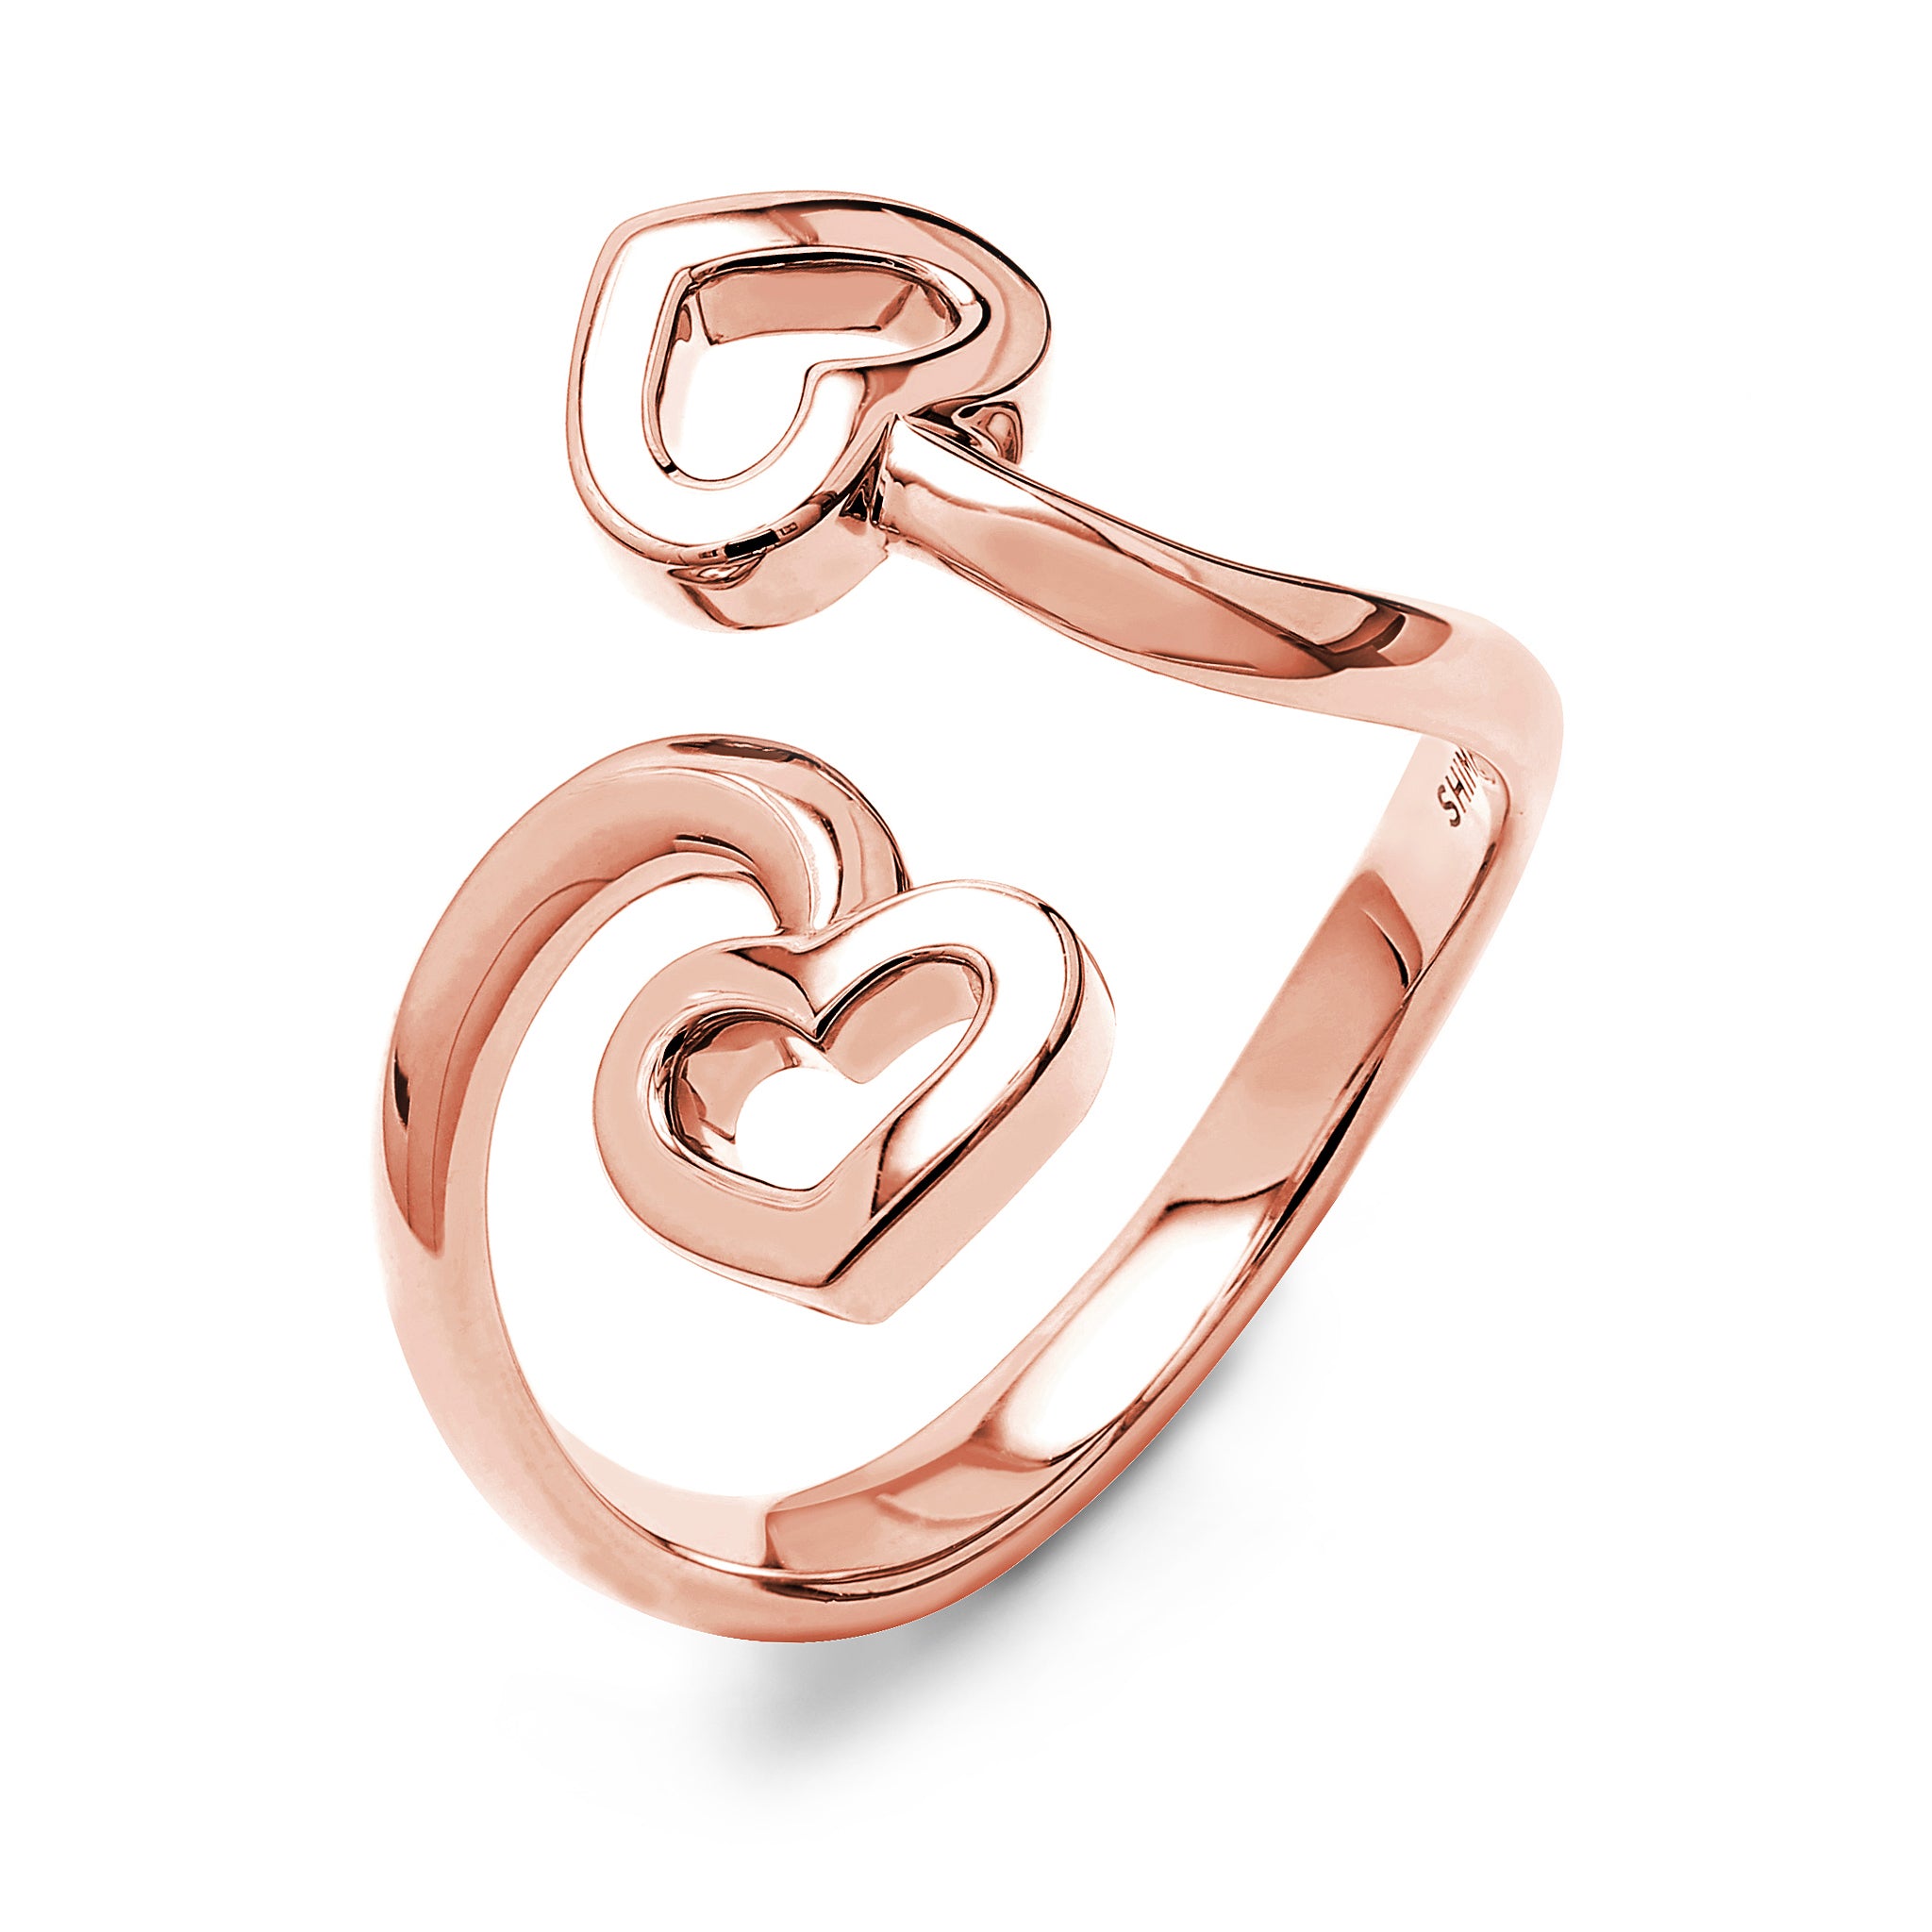 Shimansky - Two Hearts Twist Ring Crafted in 18K Rose Gold